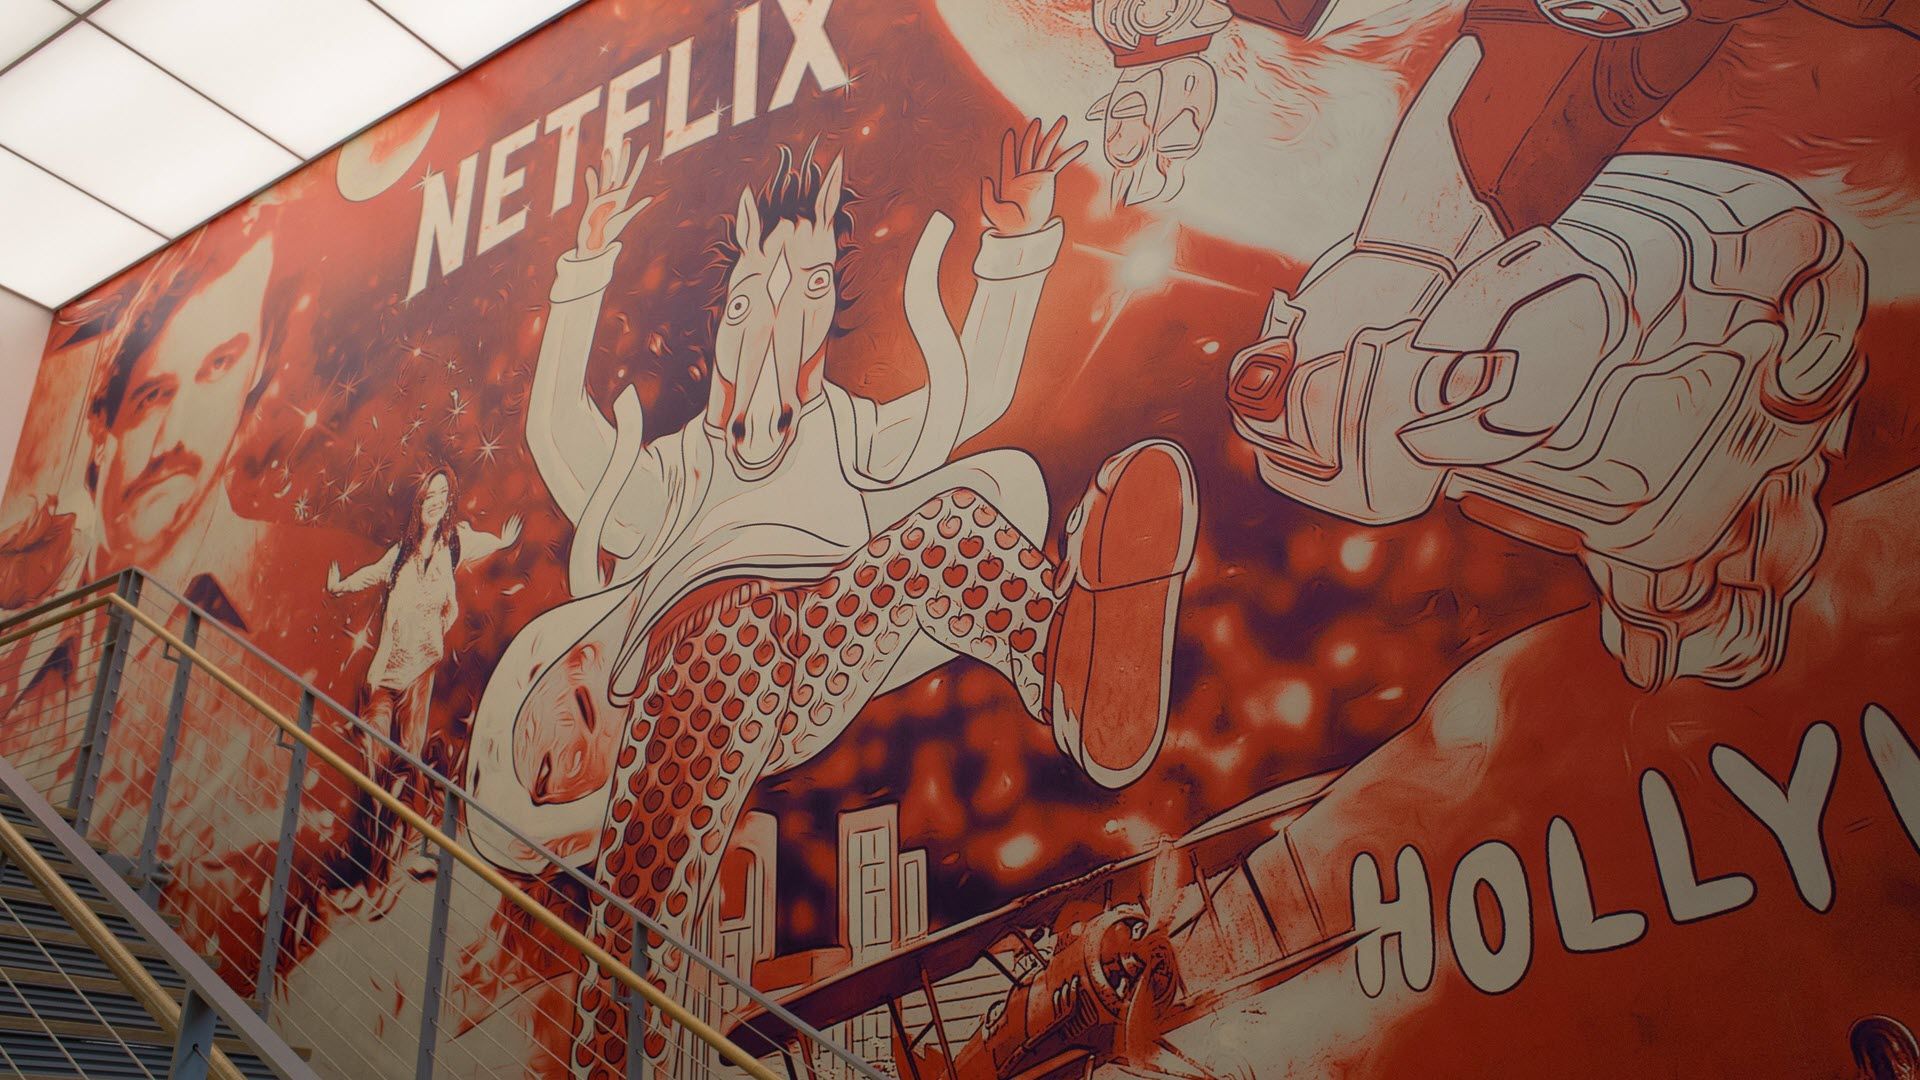 A wall with Netflix spraypainted on it